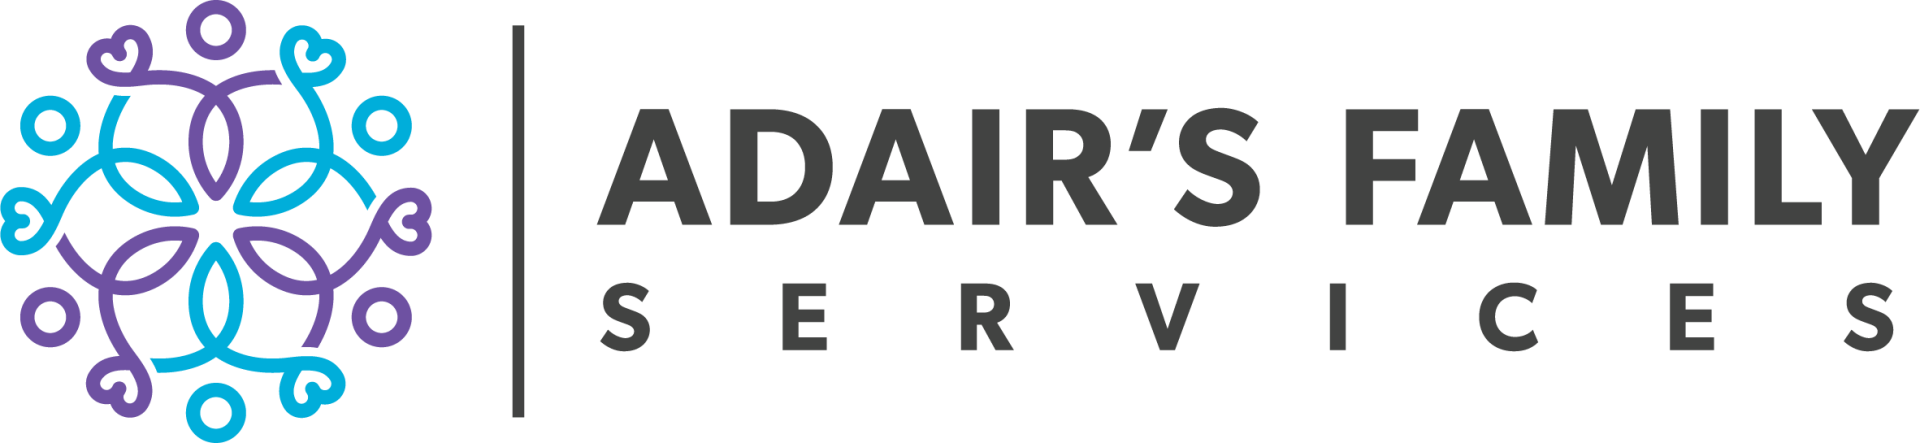 Adair's Family Services